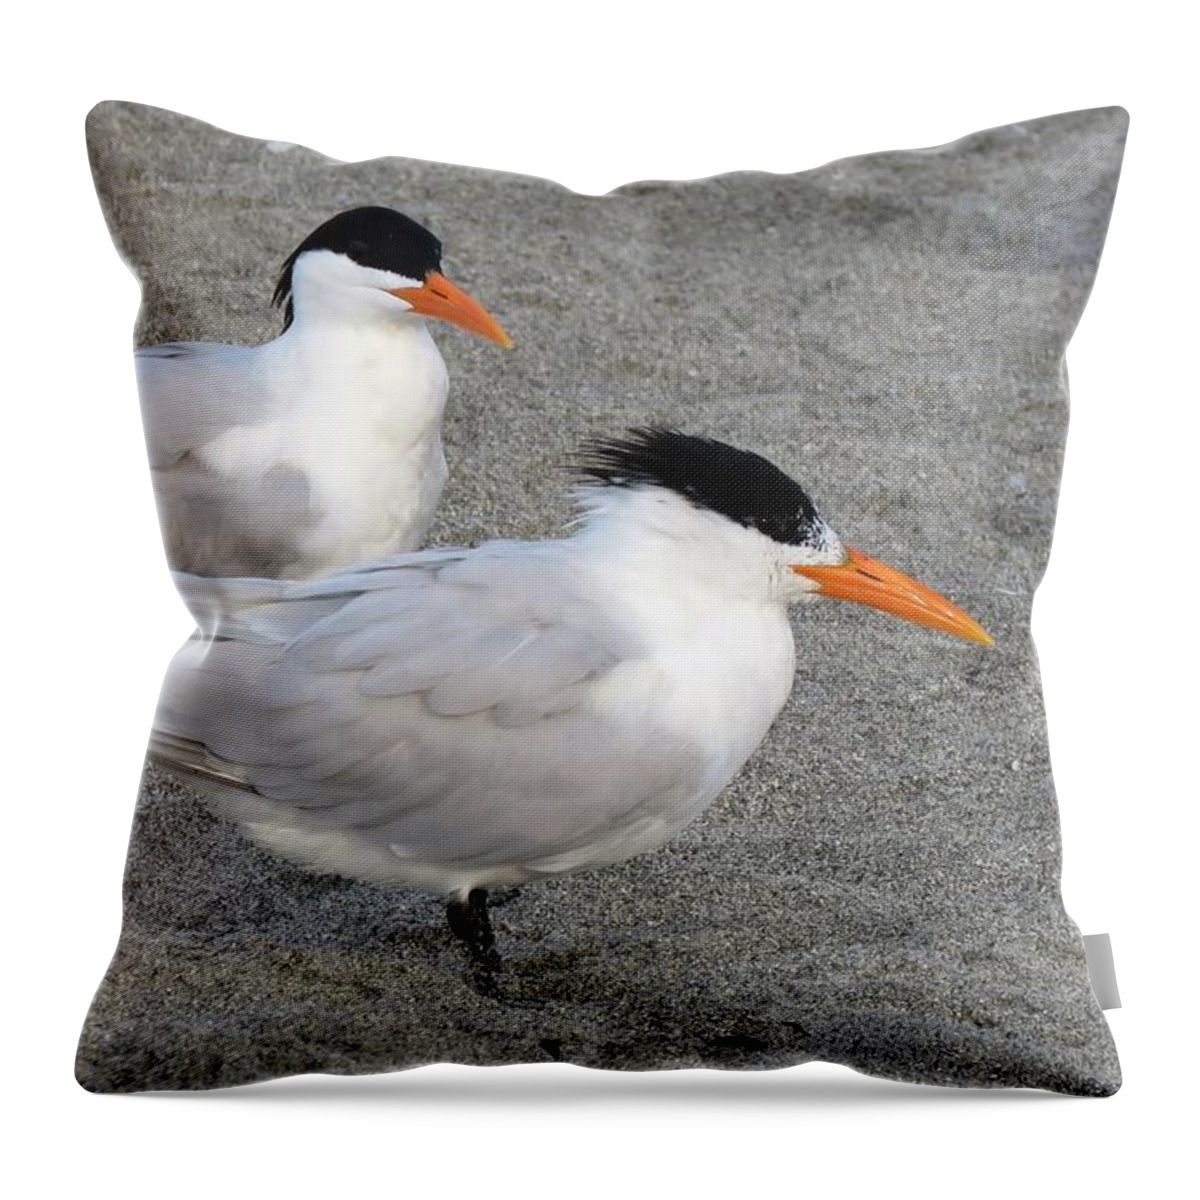 Tern Throw Pillow featuring the photograph Royal Terns by Keith Stokes